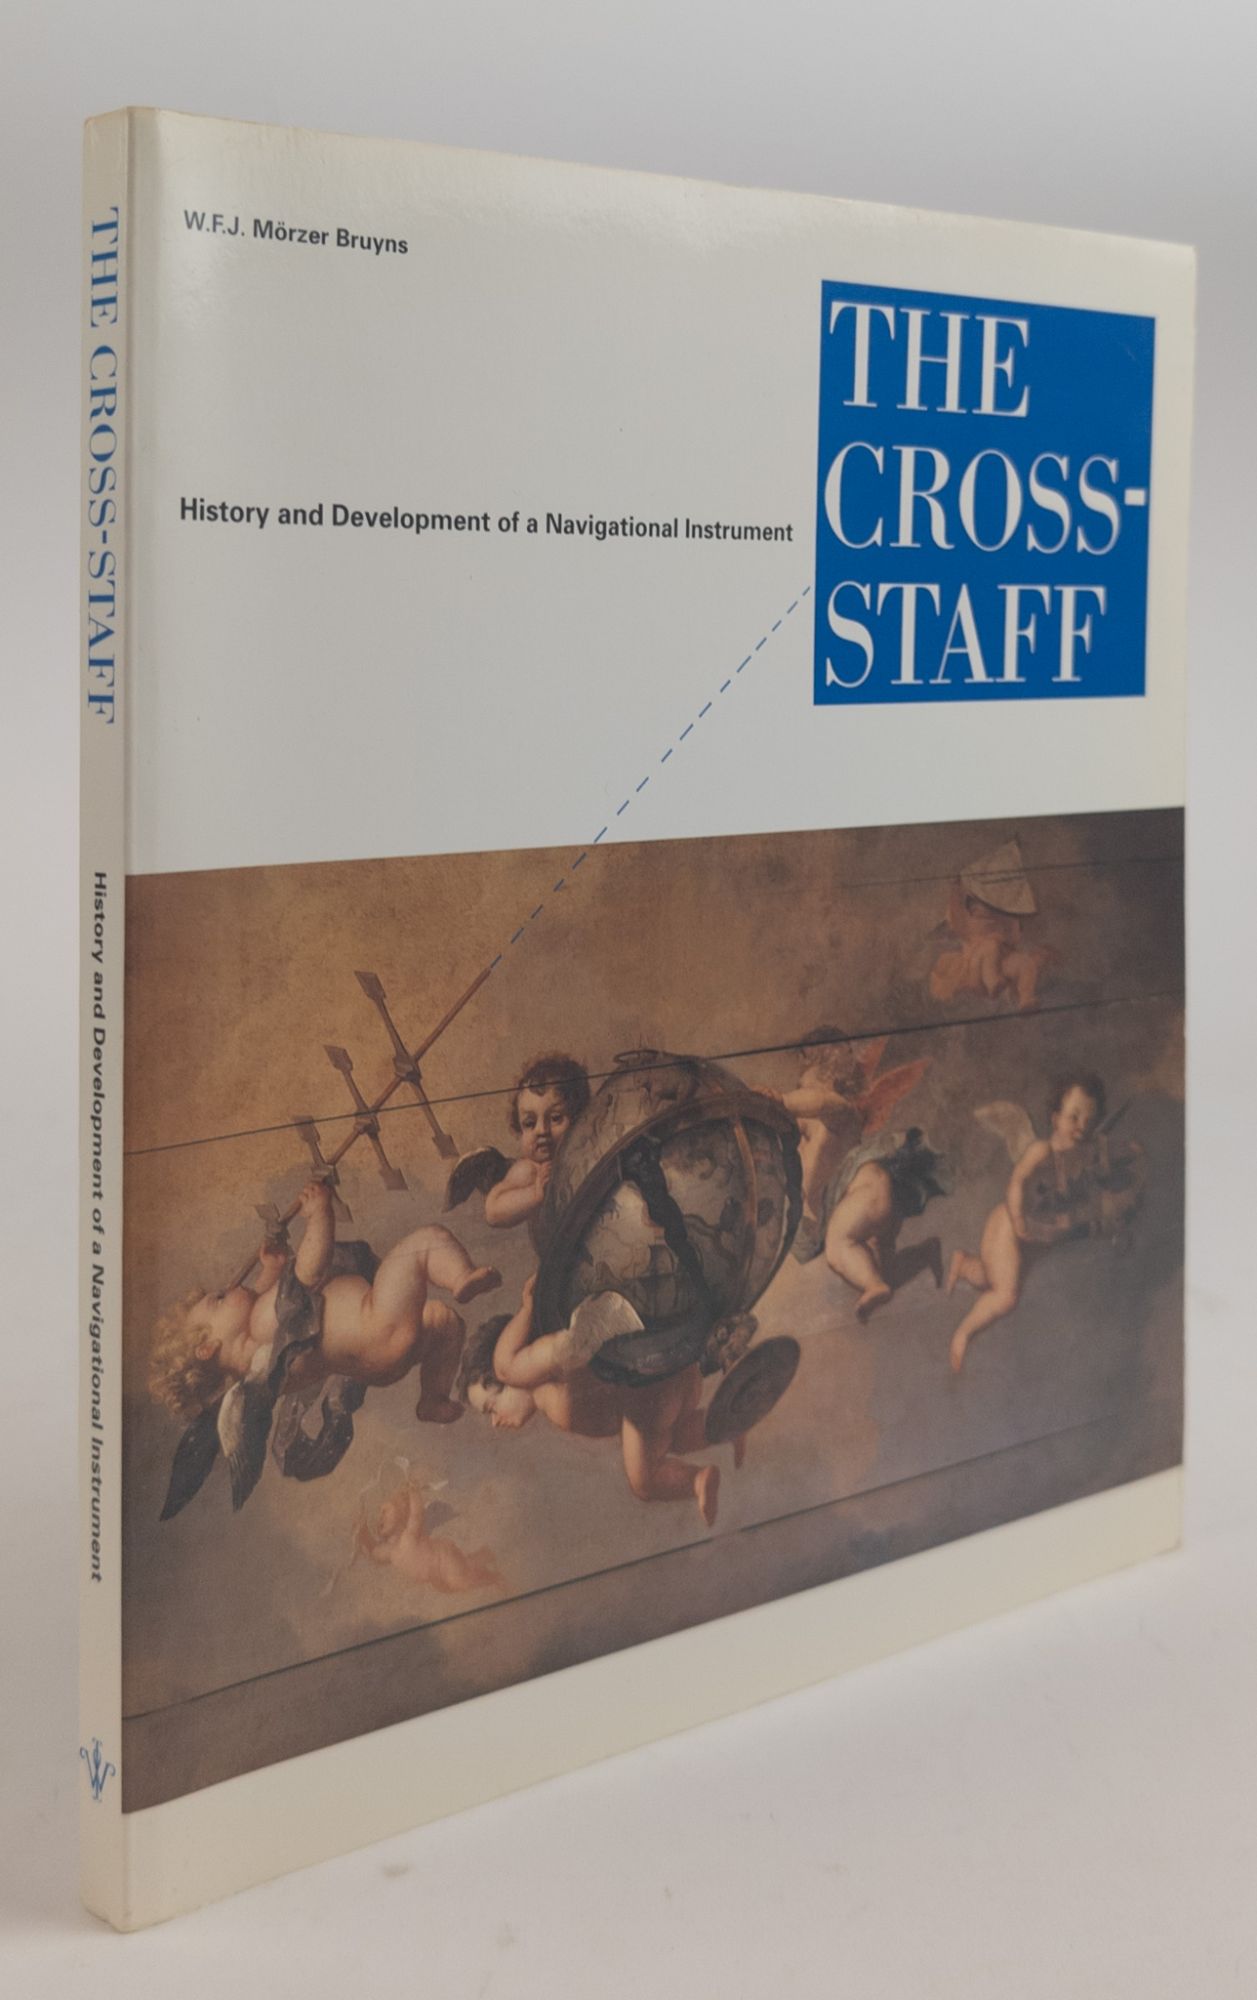 THE CROSS-STAFF: HISTORY AND DEVELOPMENT OF A NAVIGATIONAL INSTRUMENT [Inscribed] - Morzer Bruyns, W.F.J.